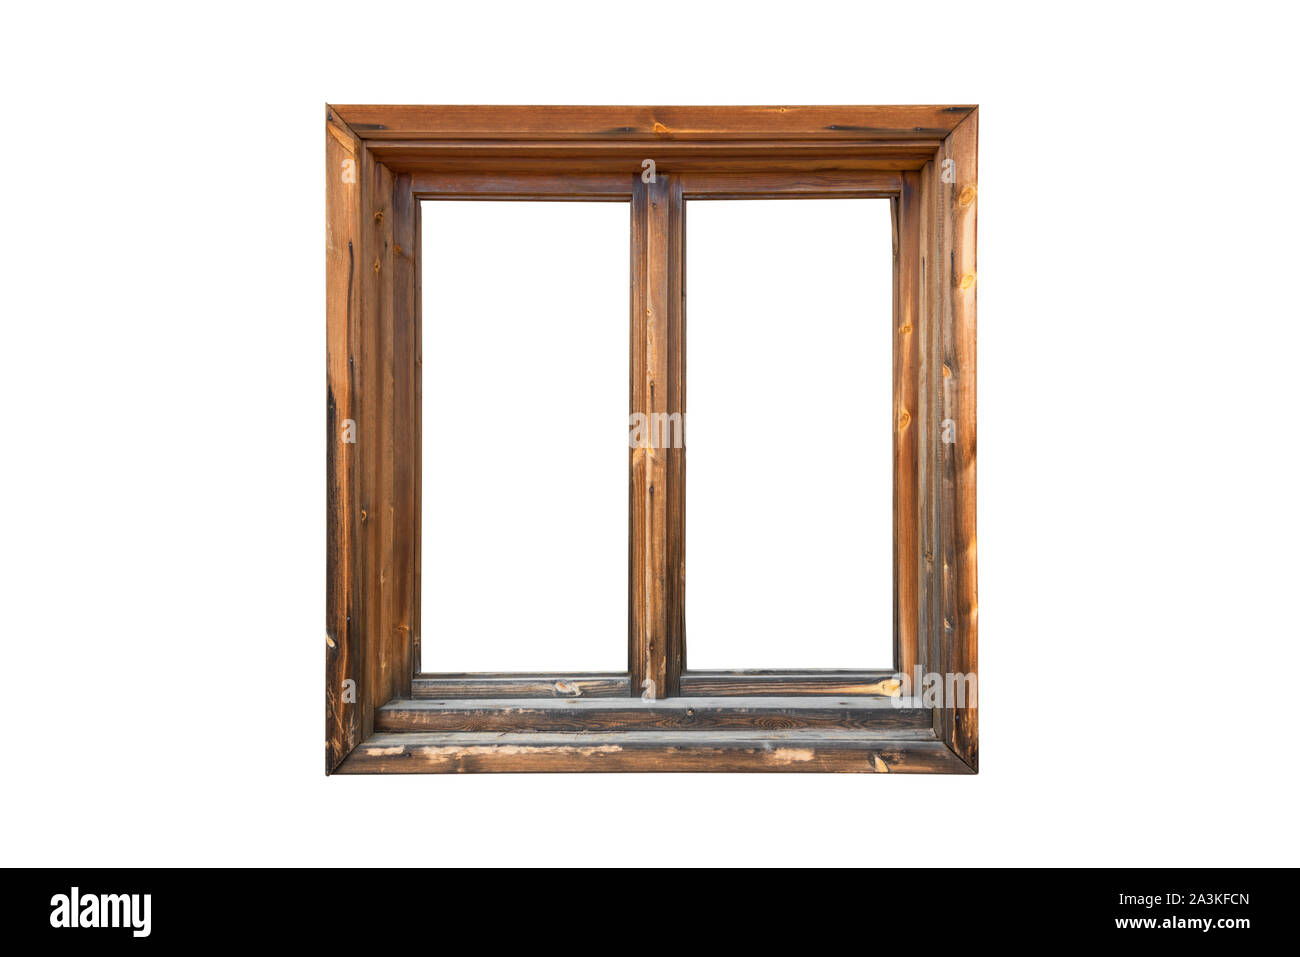 A wooden window isolated on white background Stock Photo